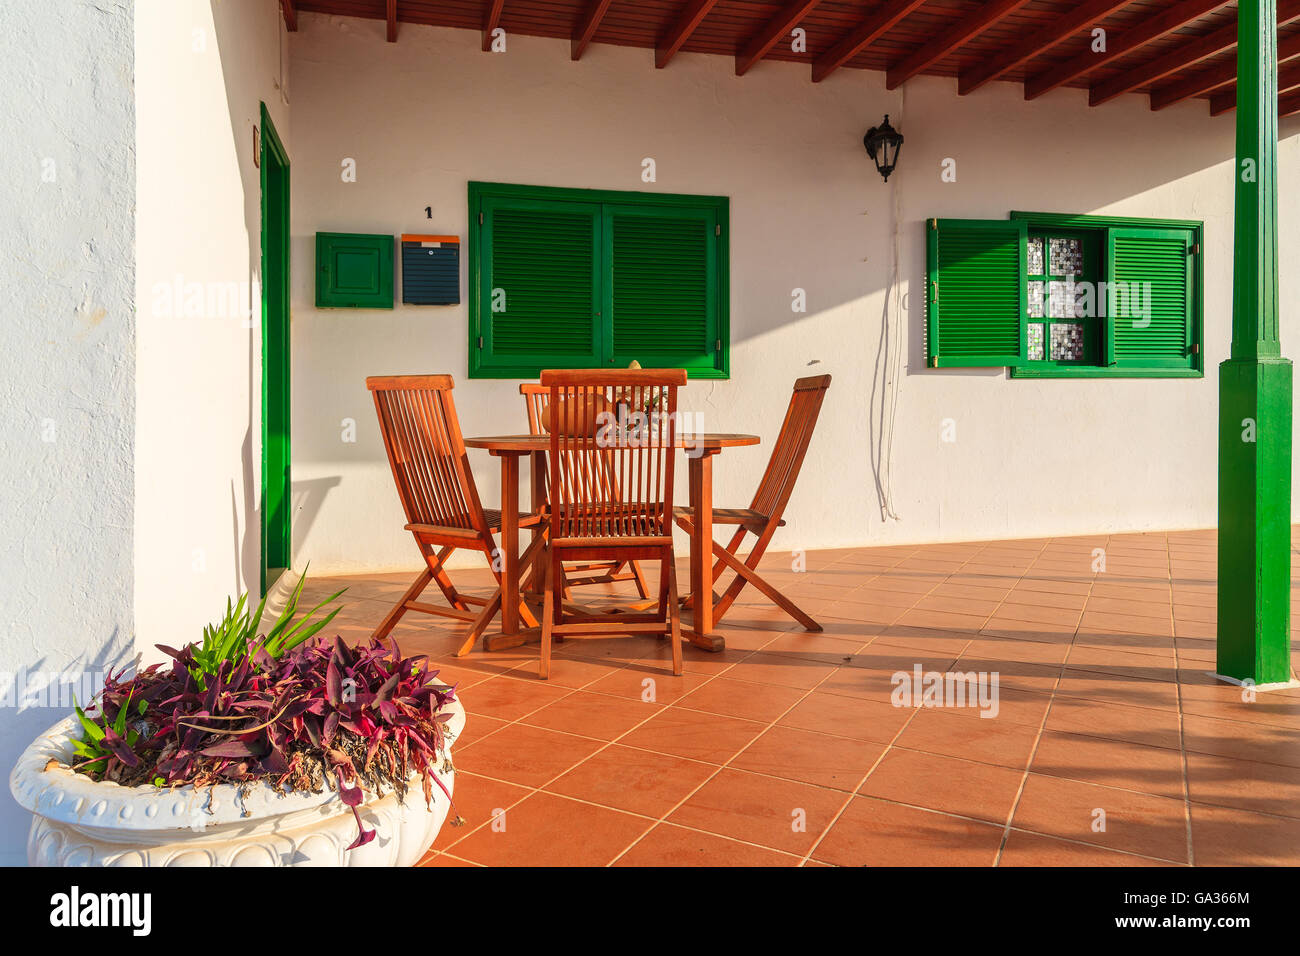 LANZAROTE ISLAND, SPAIN - JAN 15, 2015: patio of typical white house with green door and windows in Las Brenas village. Lanzarote island is popular place to buy residential holiday properties. Stock Photo